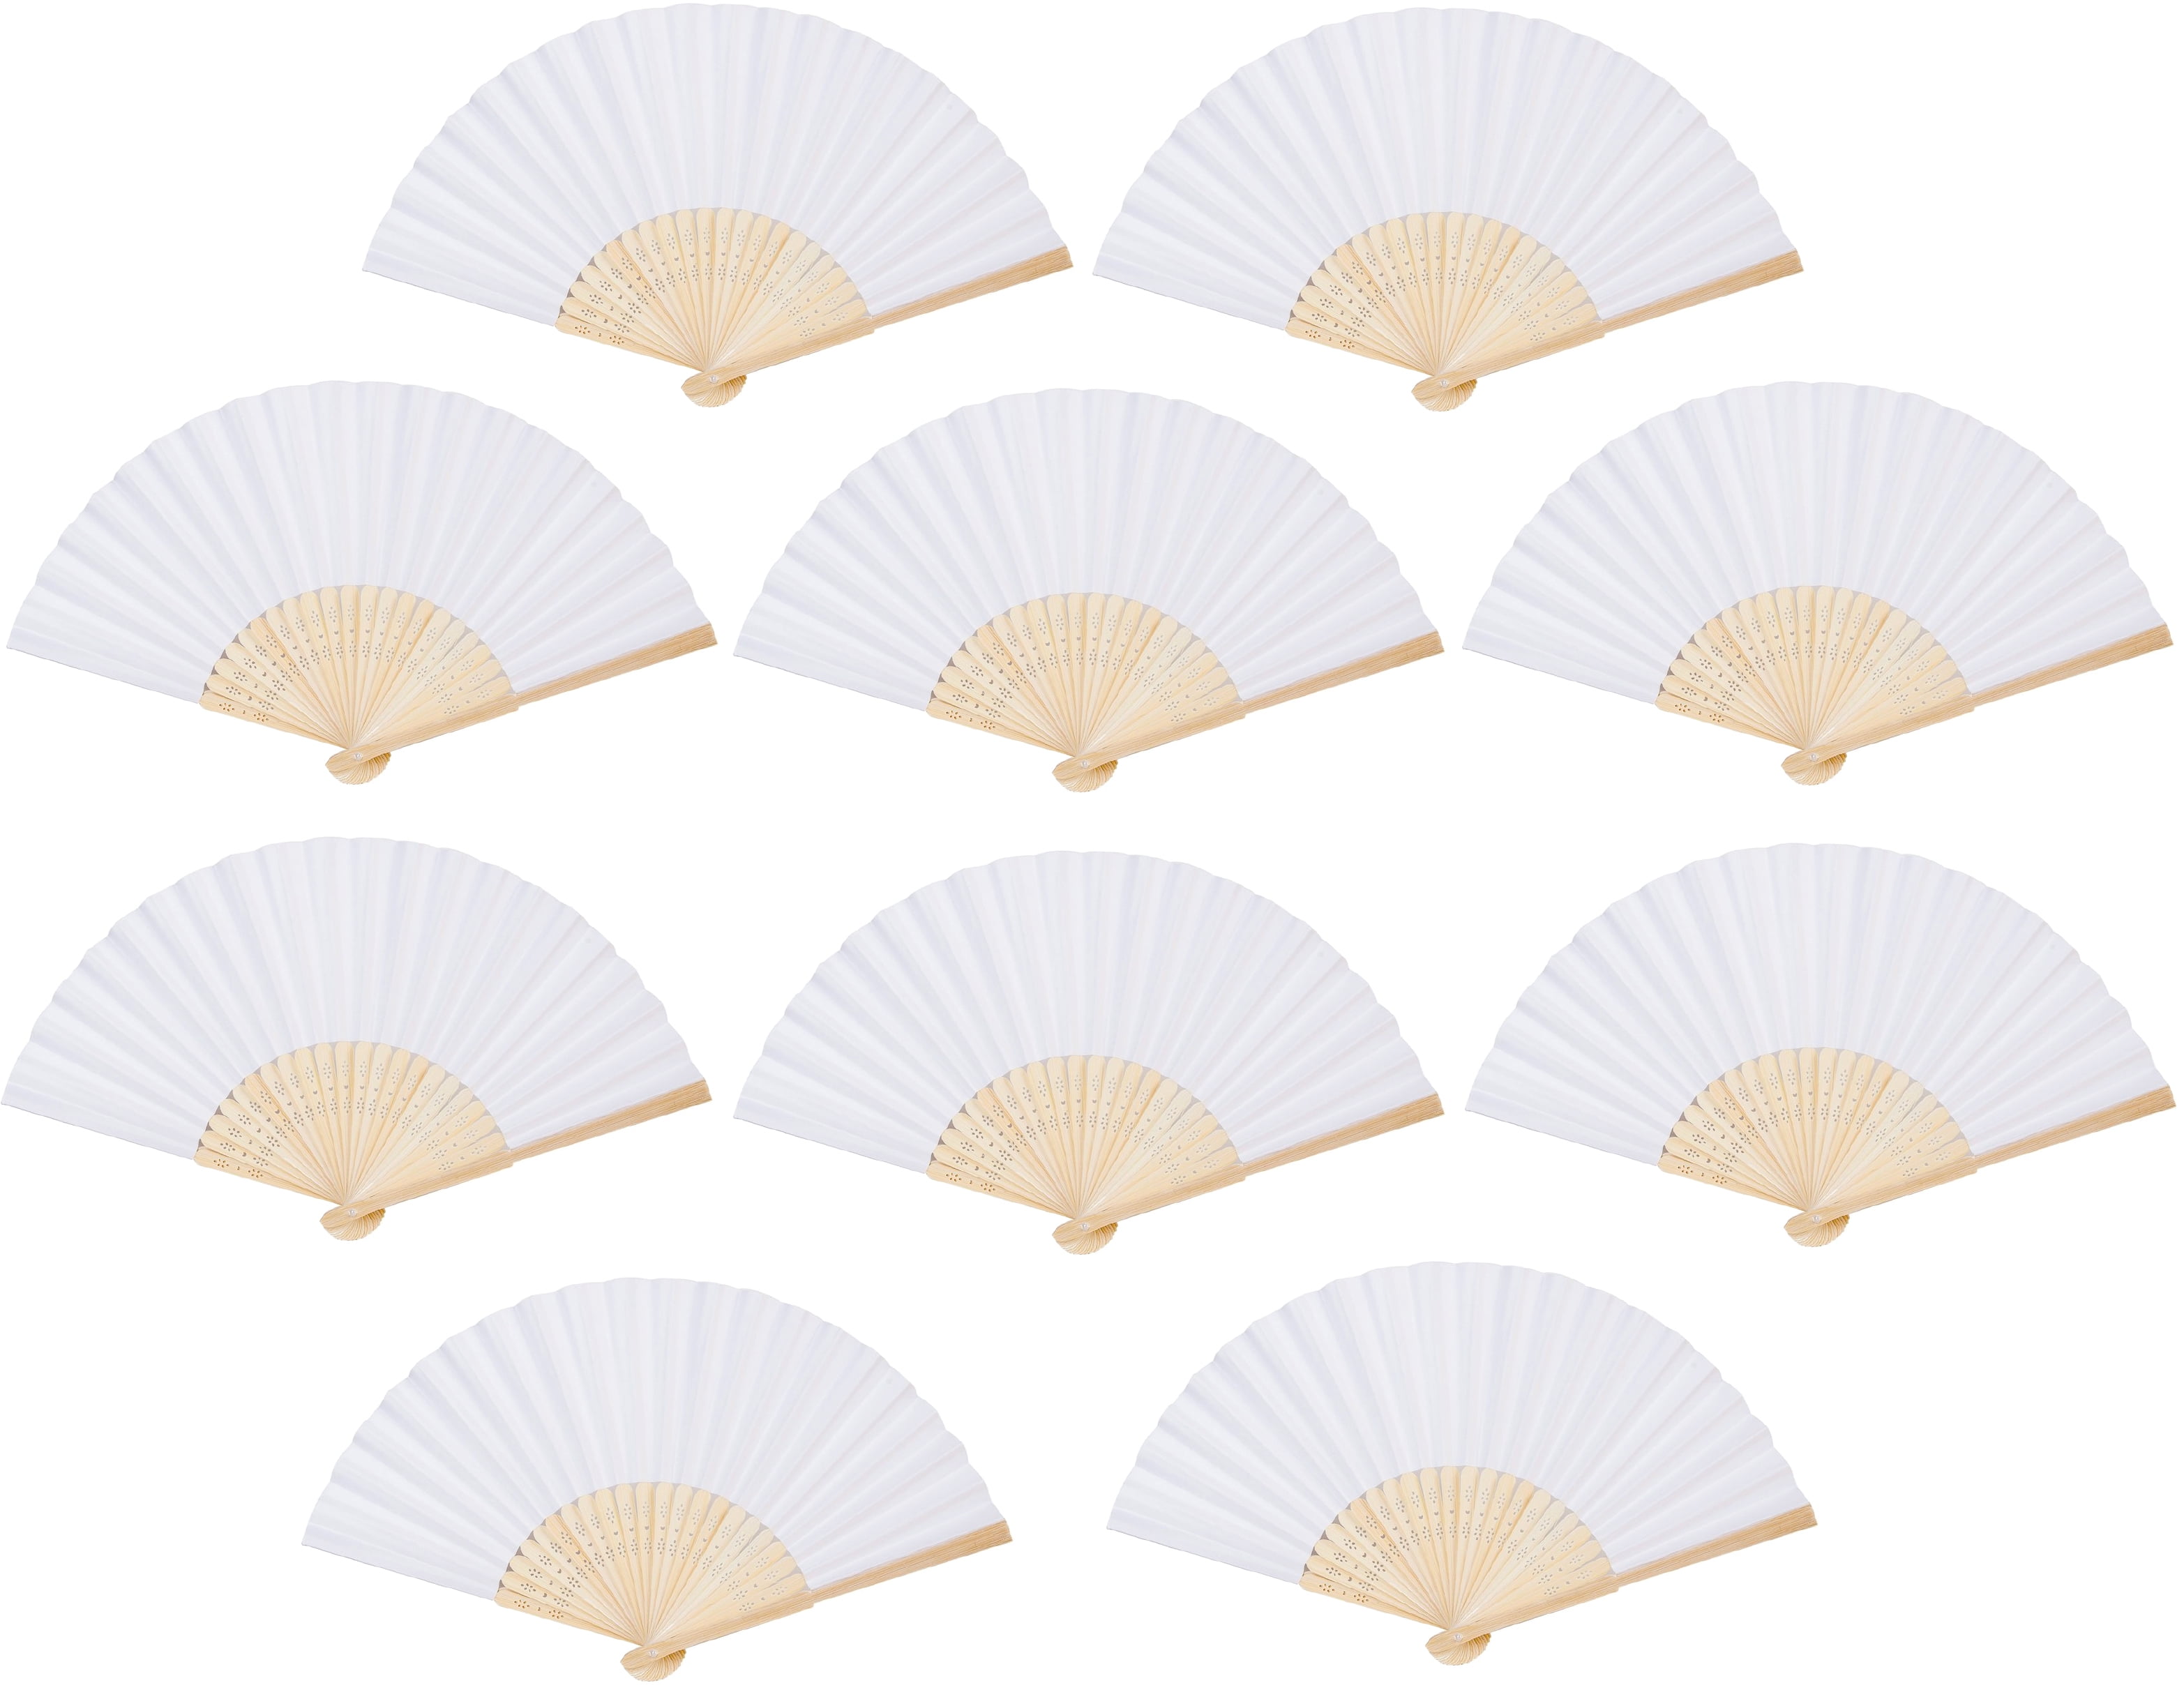 Pink Paper Hand Fans Bamboo Chinese Folding Pocket Fan Decor Gifts New 10 Pack 